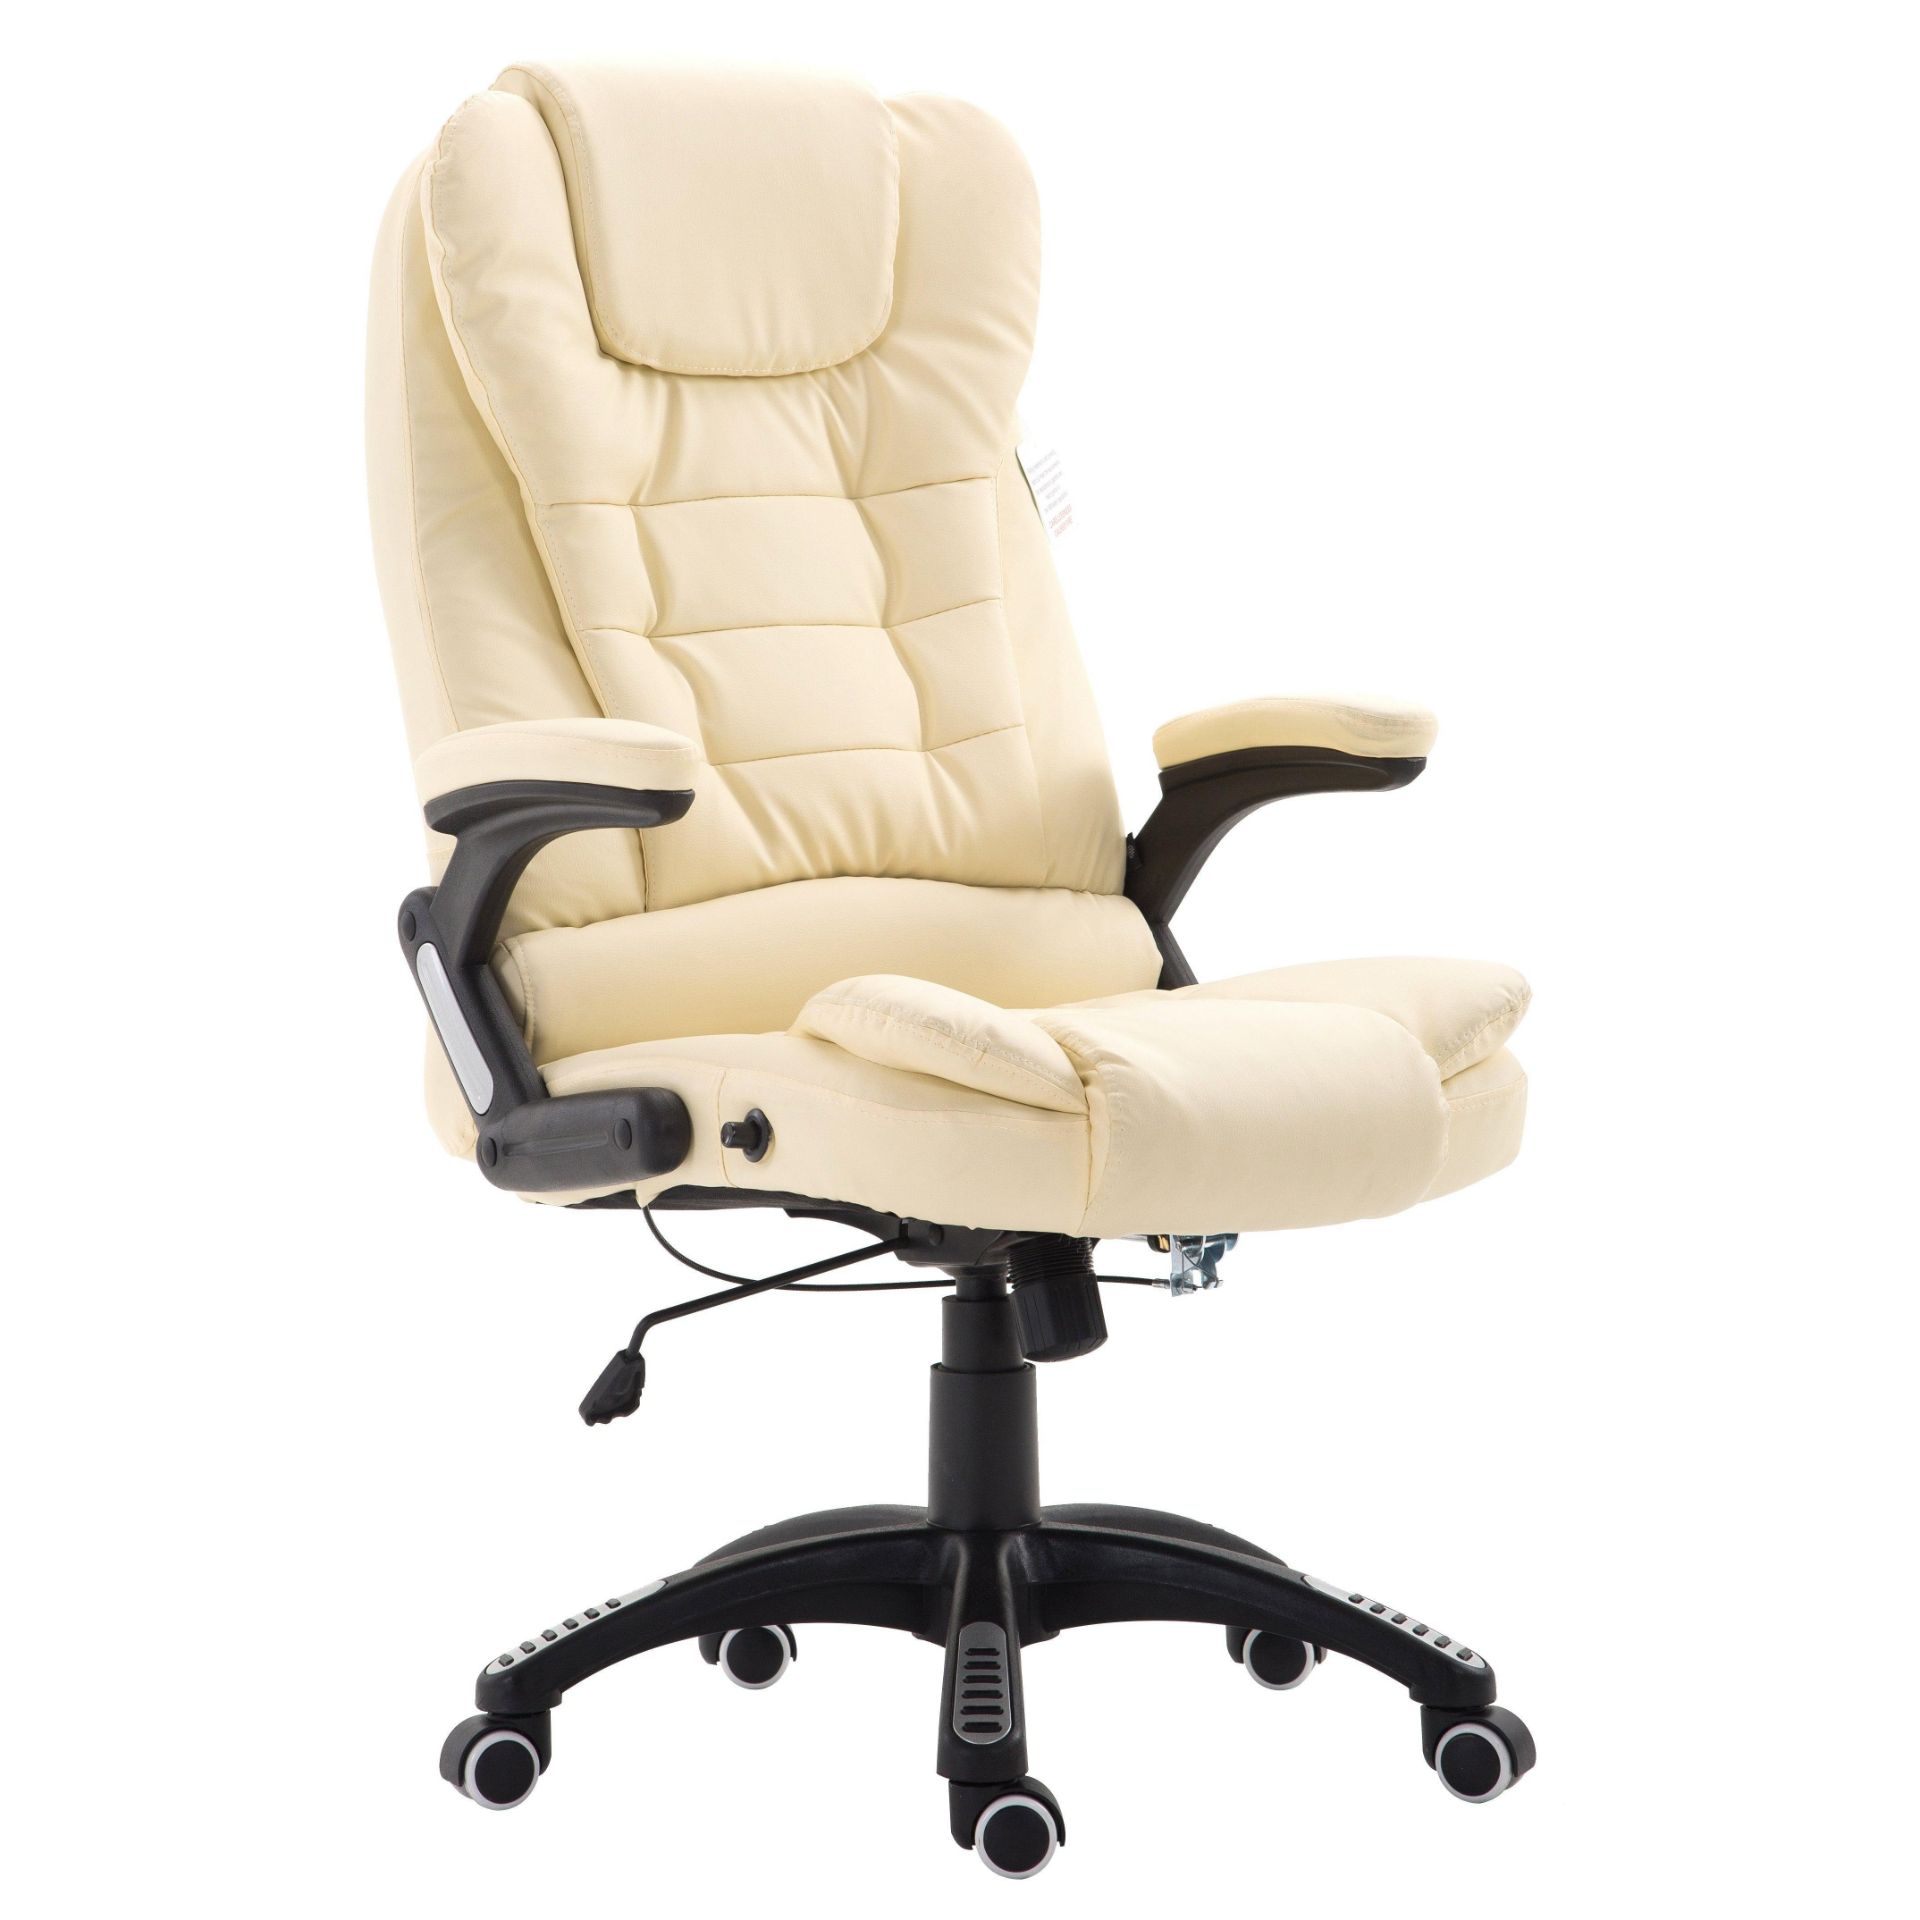 Executive Recline High Back Extra Padded Office Chair, MO17 Cream. - R14.